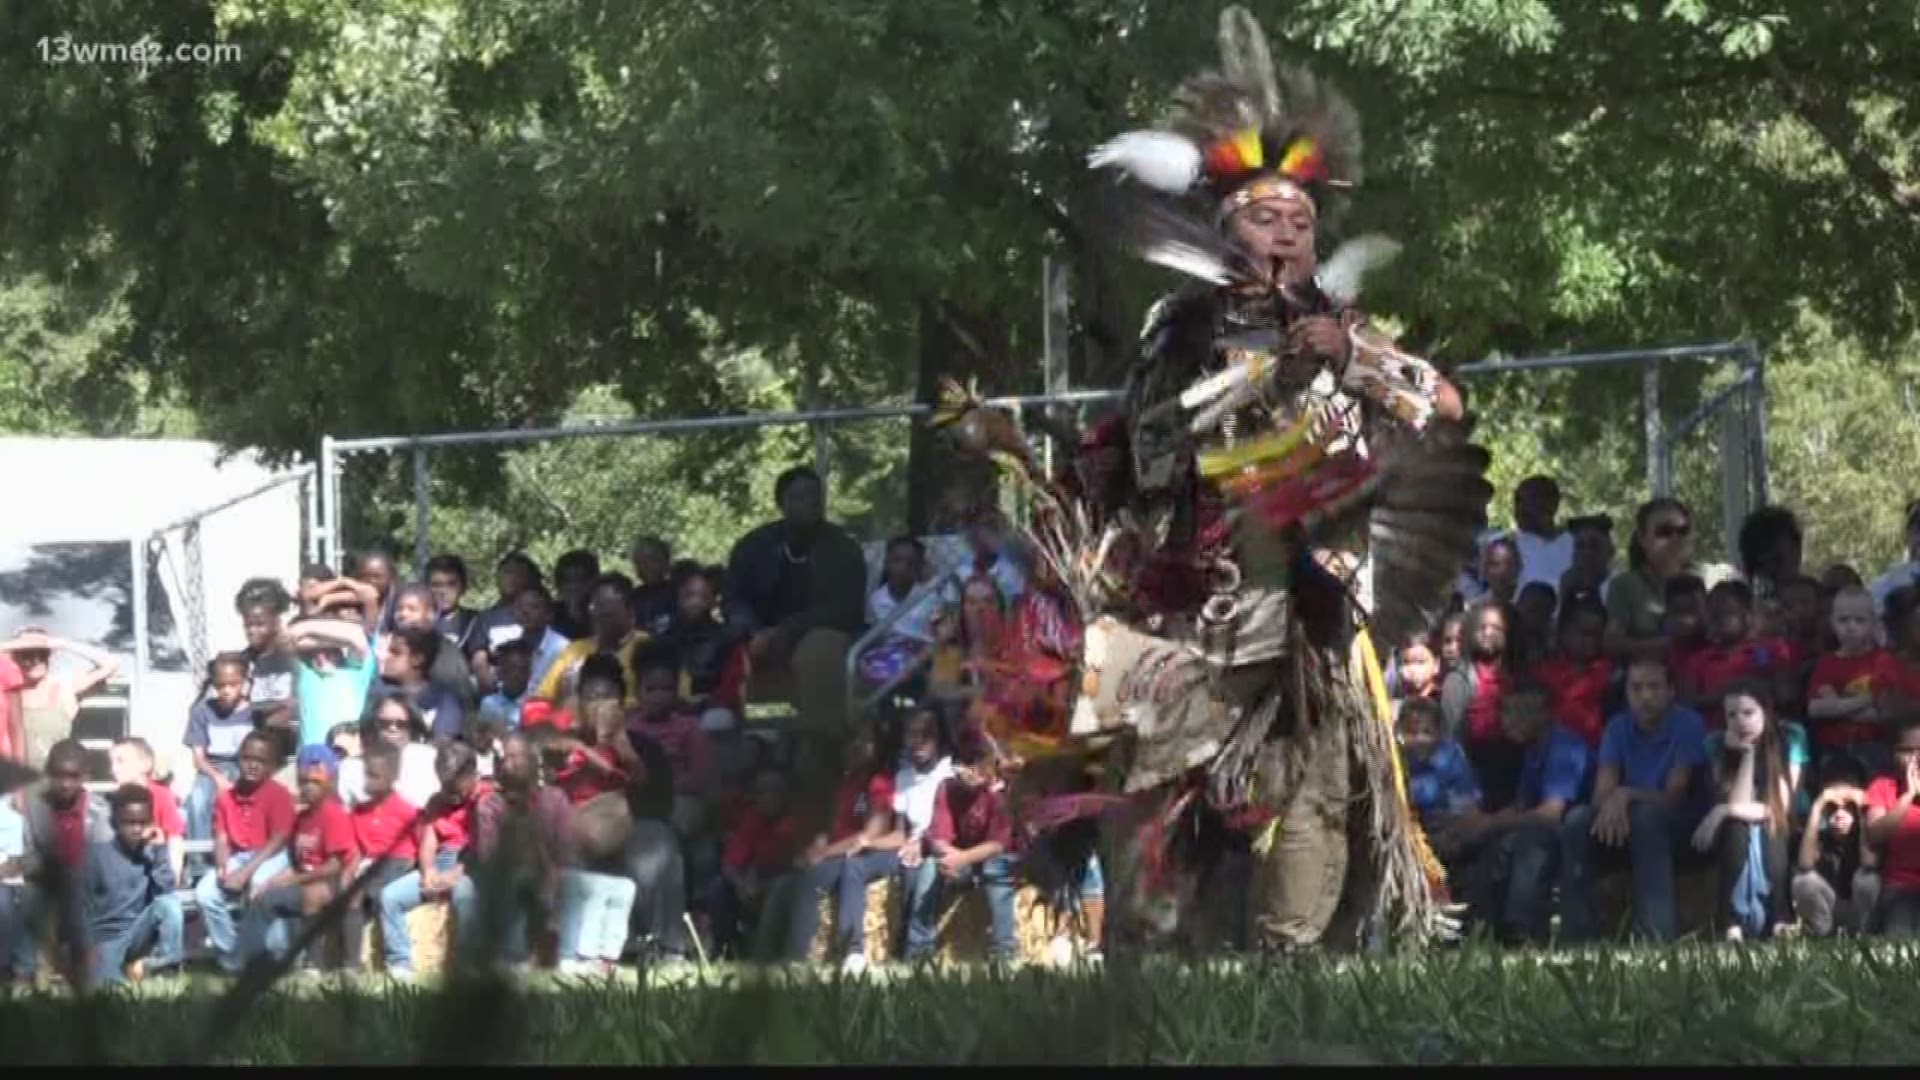 This weekend will be the 28th annual Ocmulgee Indian Celebration at the Ocmulgee Mounds National Historical Park.